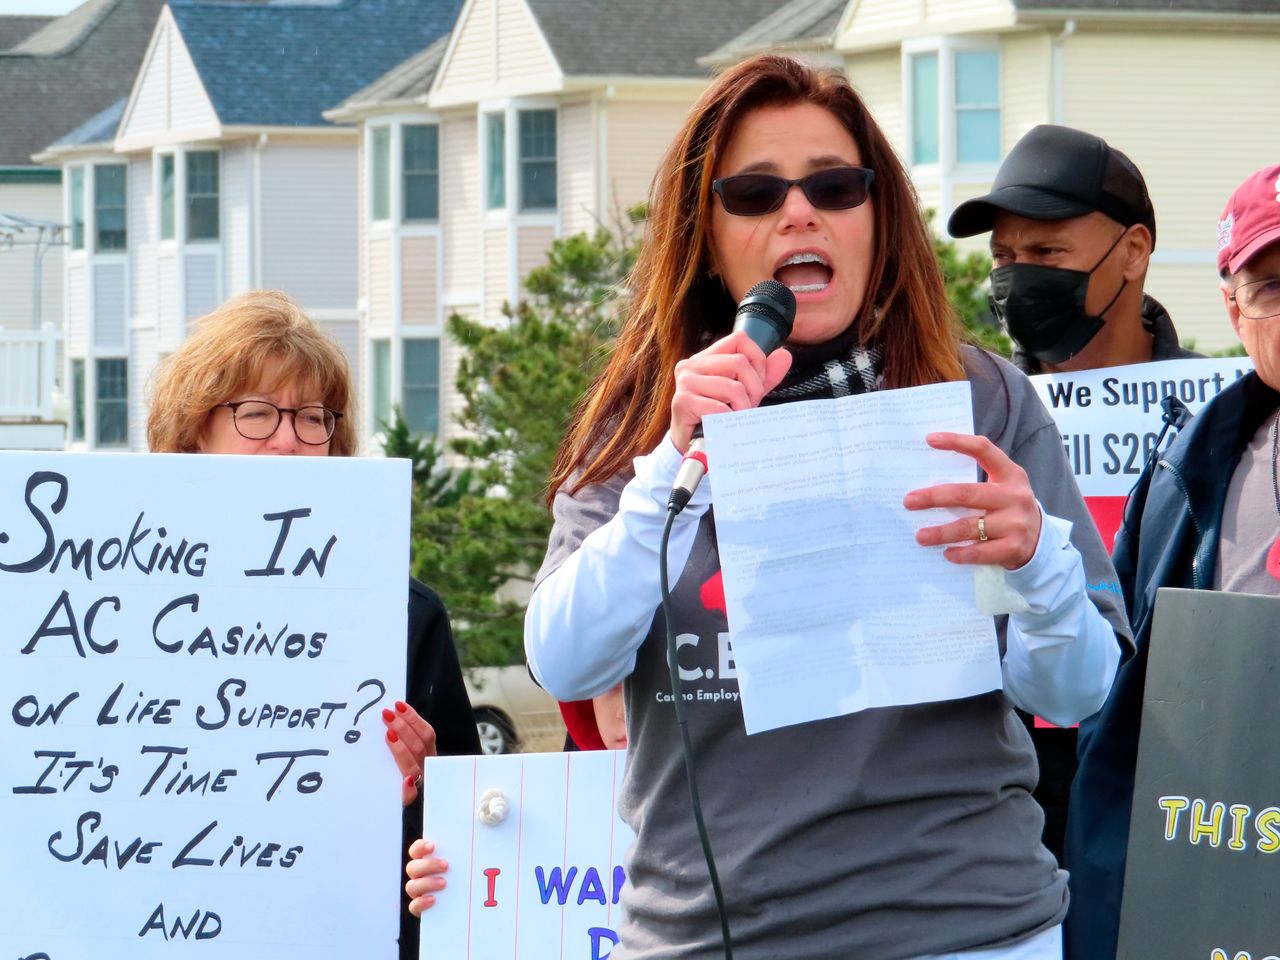 Nicole Vitola, a dealer at the Borgata casino, speaks at a rally to ban smoking in April 2022. Vitola became outspoken on the issue when the state rescinded a temporary smoking ban implemented during the pandemic.